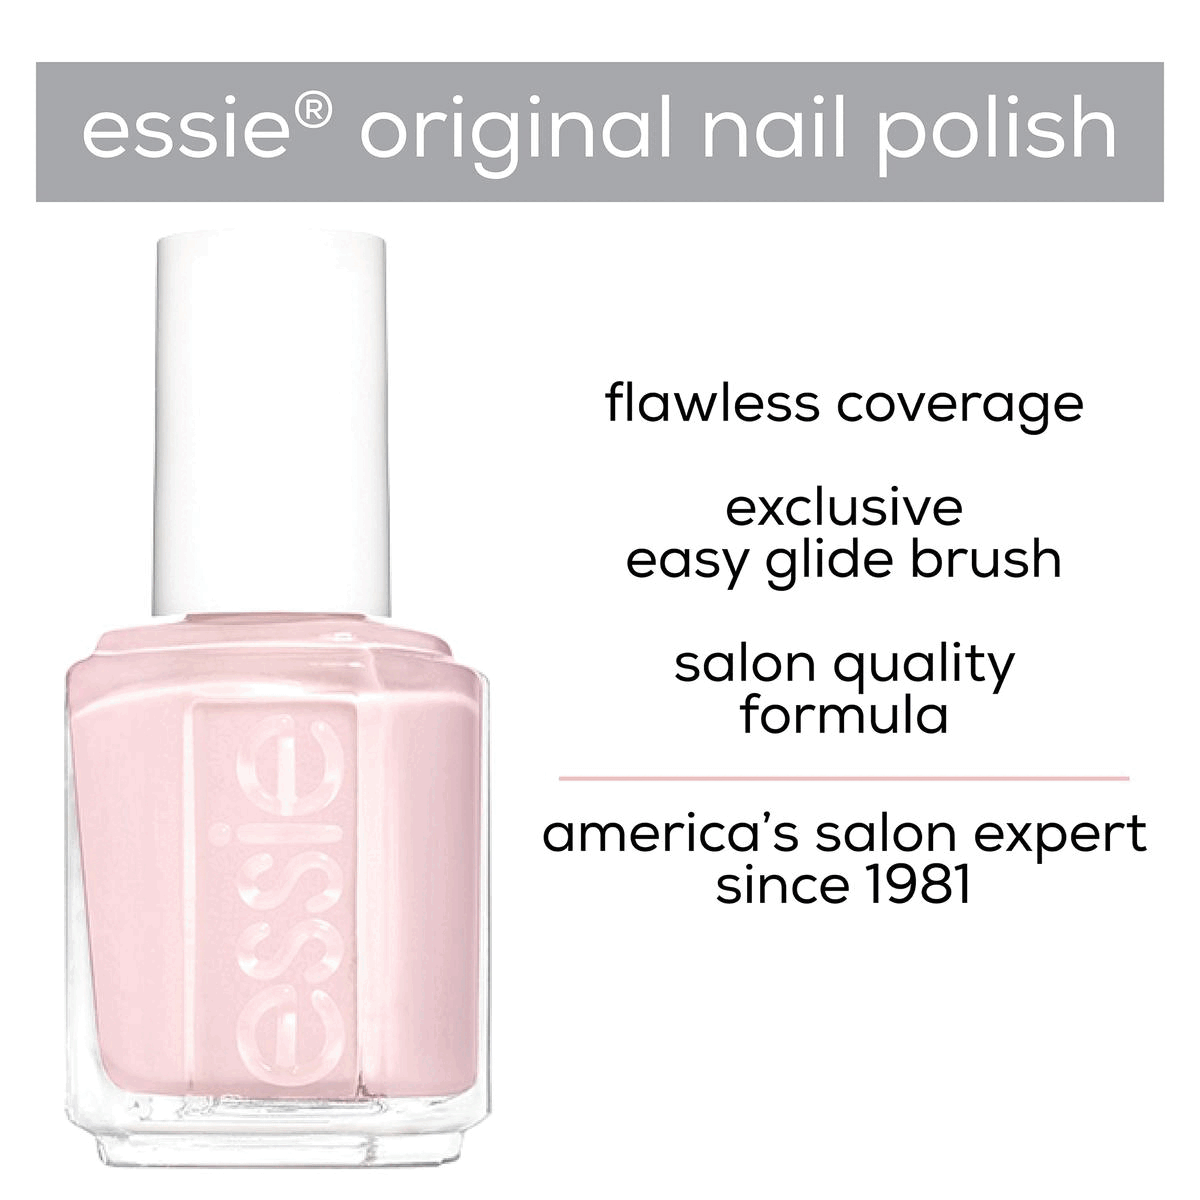 Image 1, essie original nail polish. Image 2, quick easy application, exclusive easy-glide brush